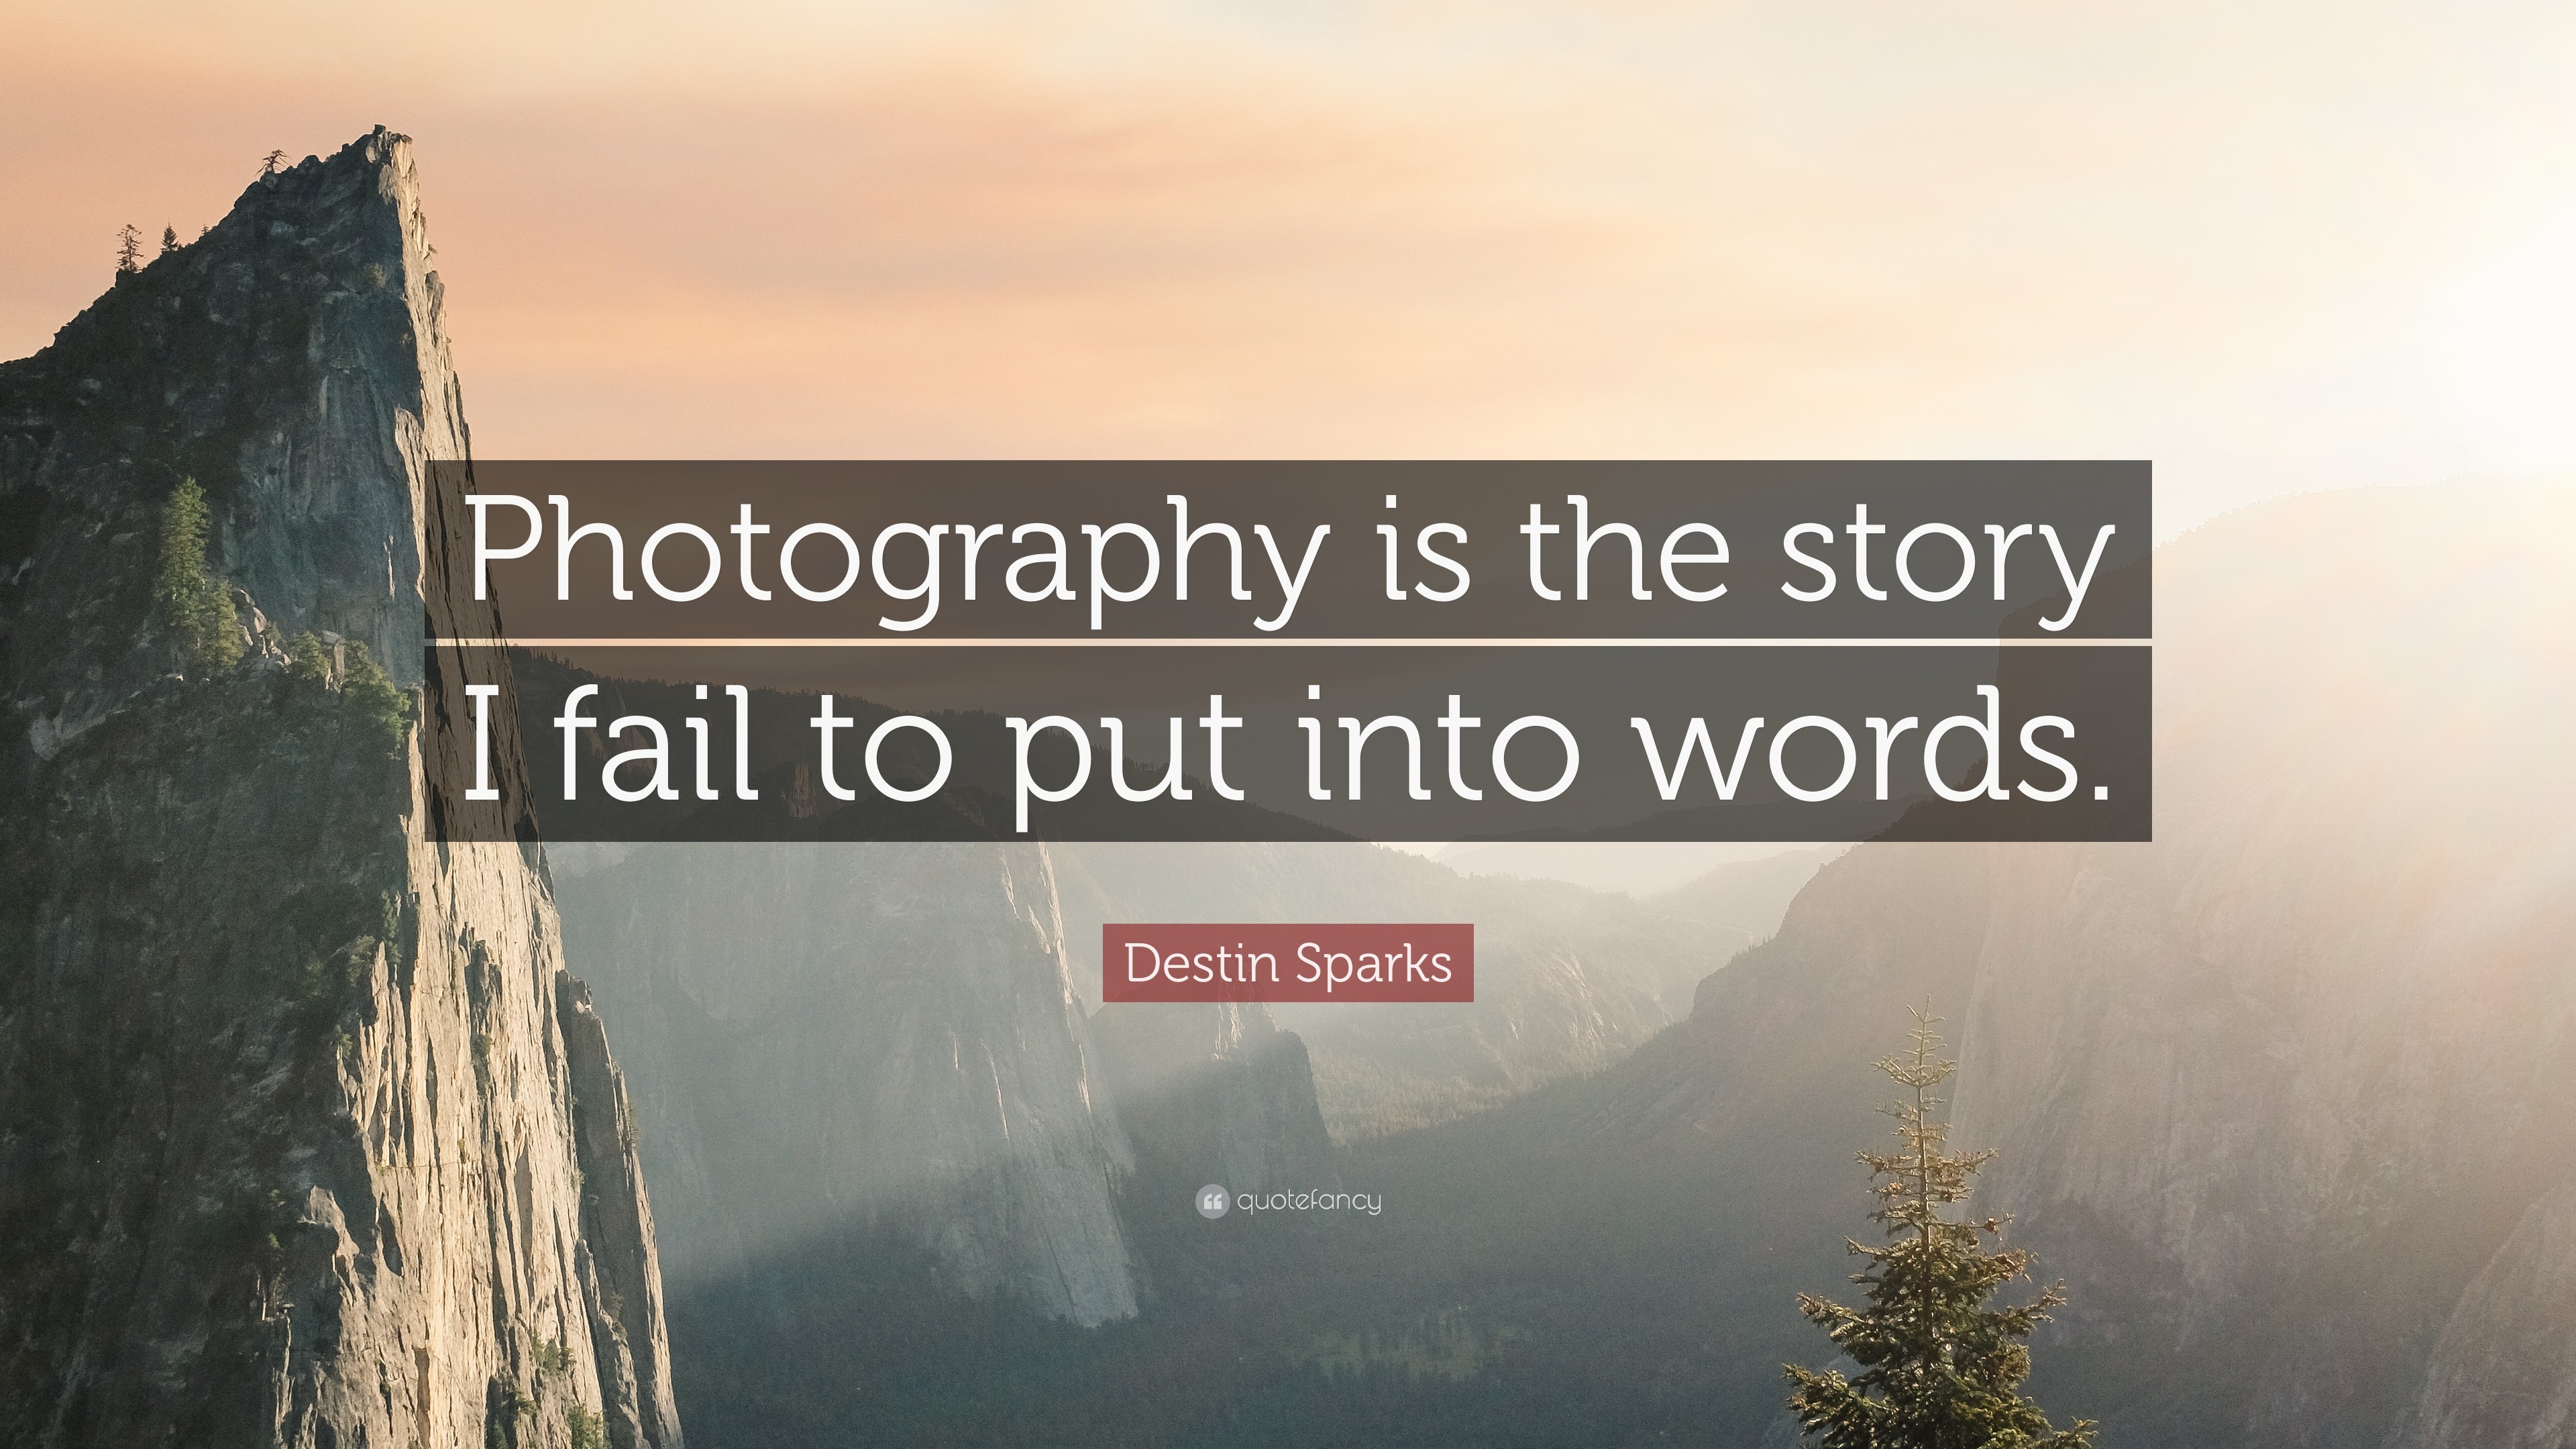 3840x2160 photography quotes | Photography Quotes: “Photography is the story I fail  to put into